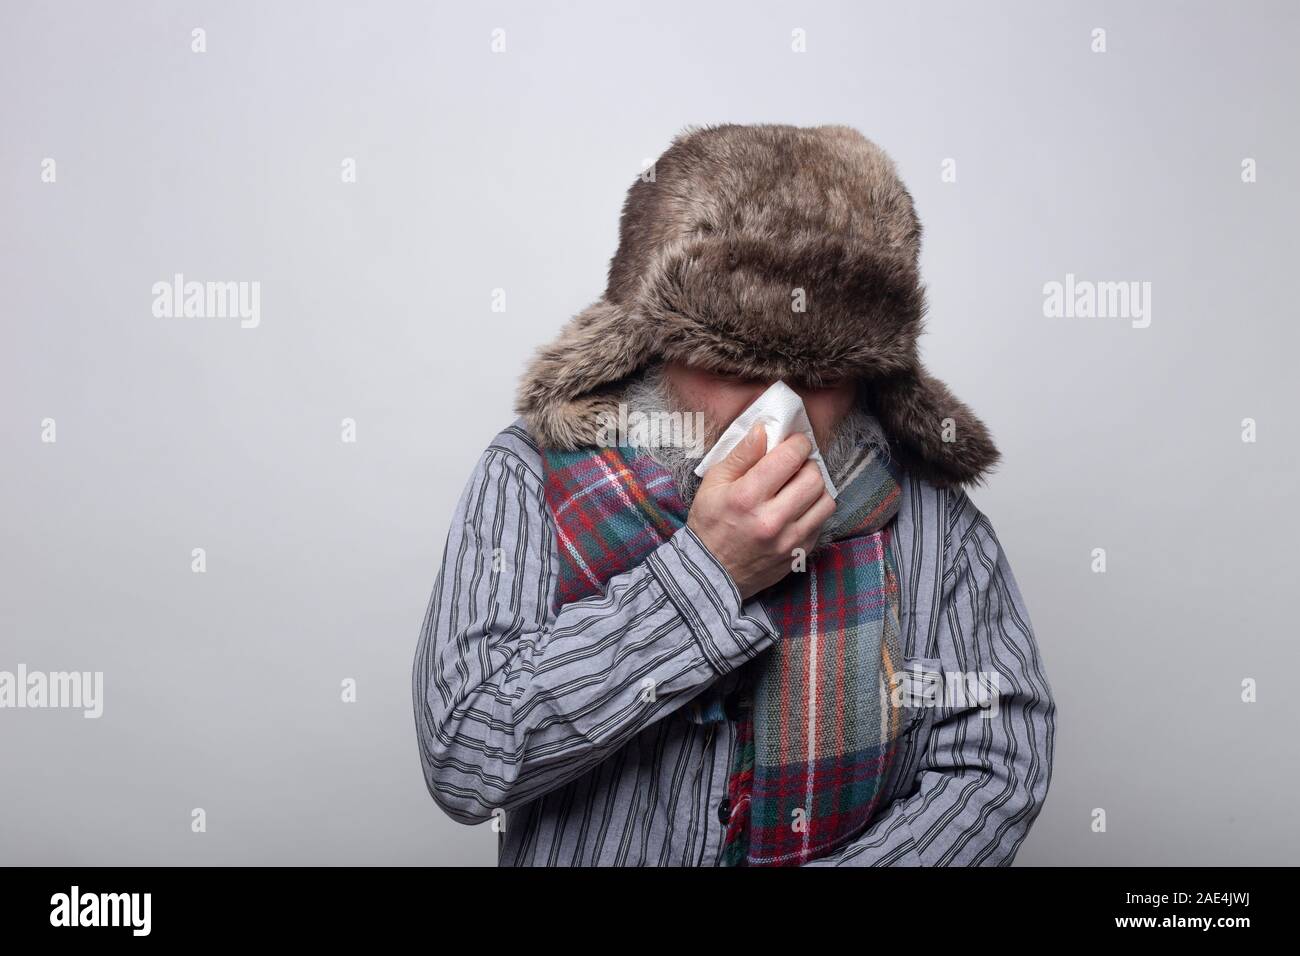 The man is sick and blowing his nose with a hat and scarf on a gray background. health concept Stock Photo